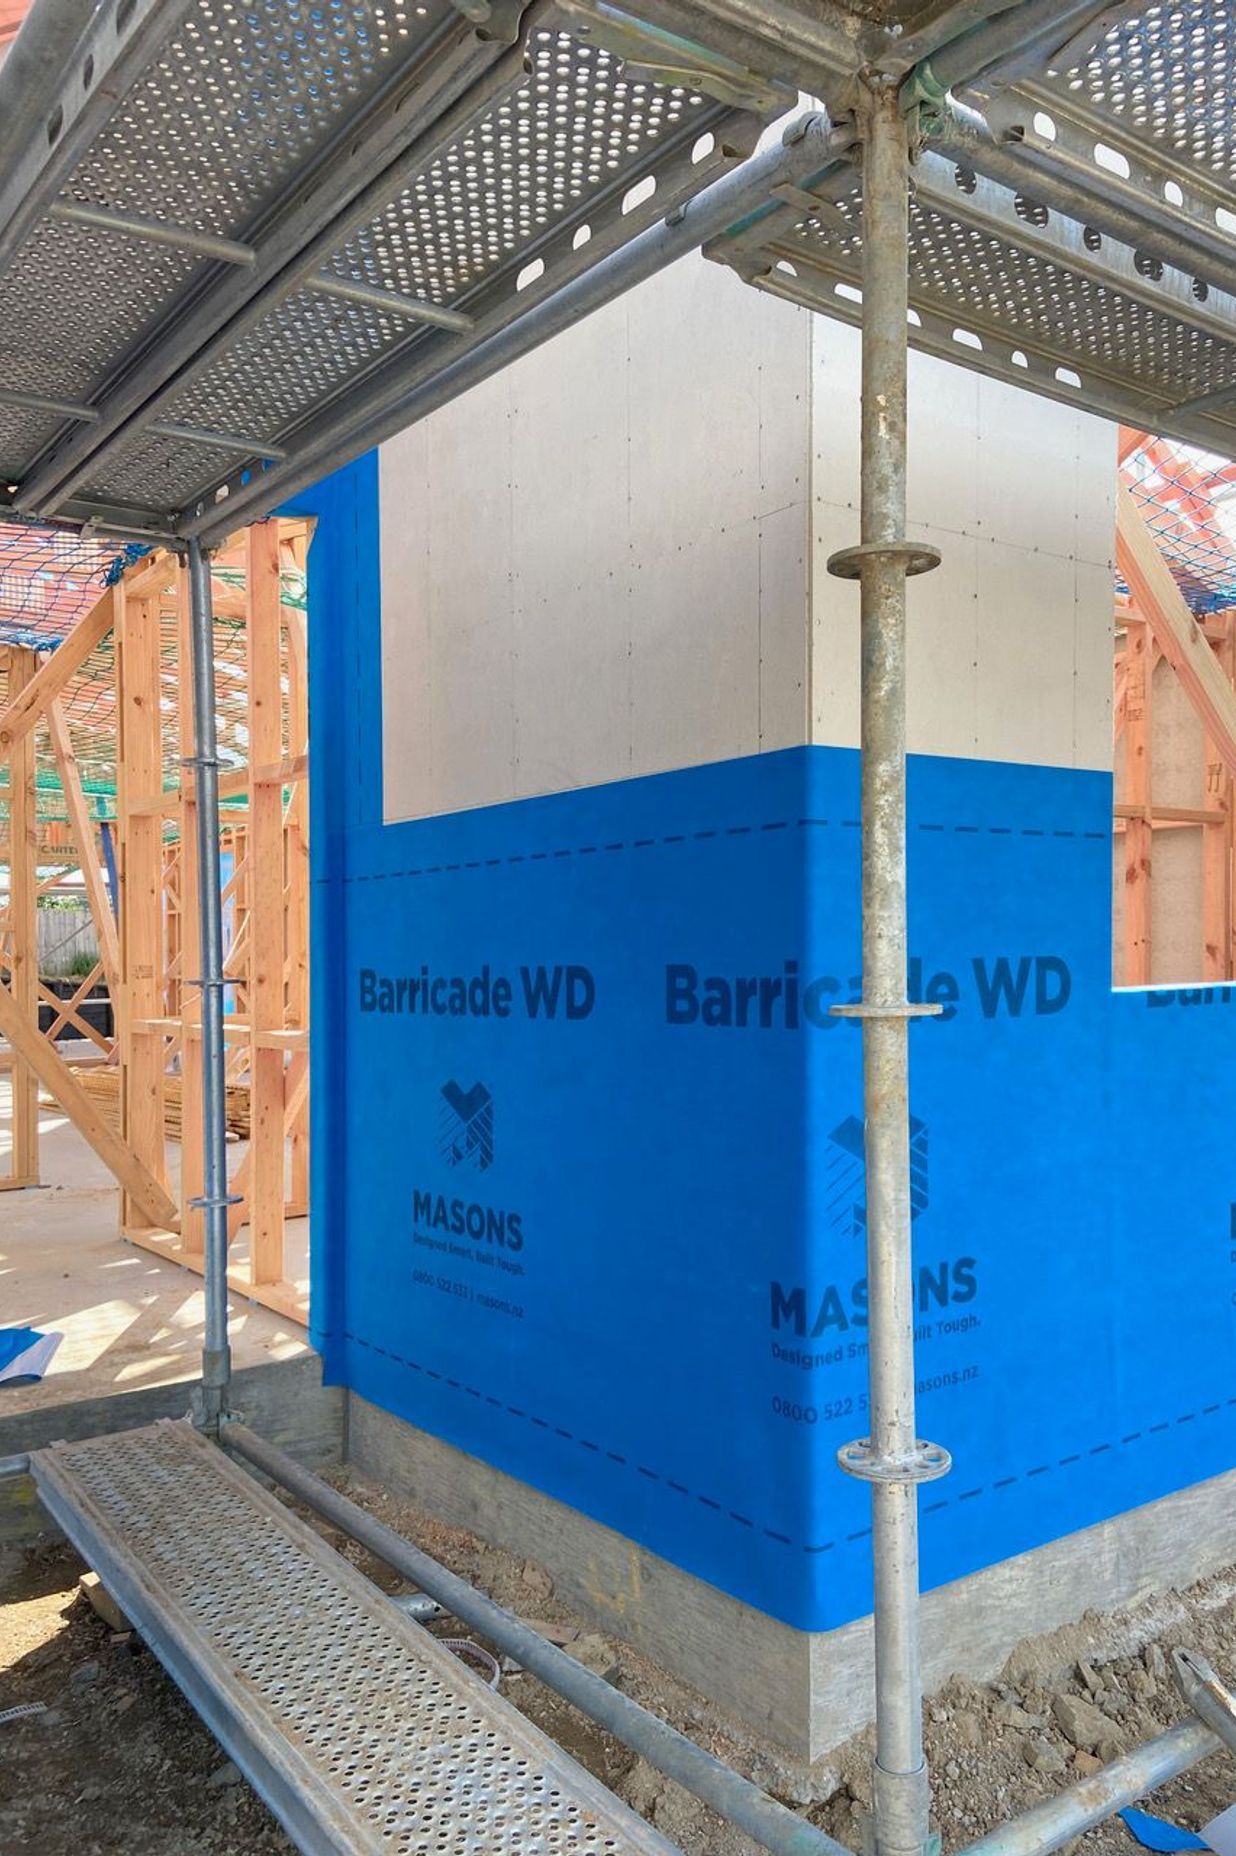 Masons Barricade WD contributes to the building moisture management design, providing a substantial secondary defense against the intrusion of moisture and air over the lifetime of the building.